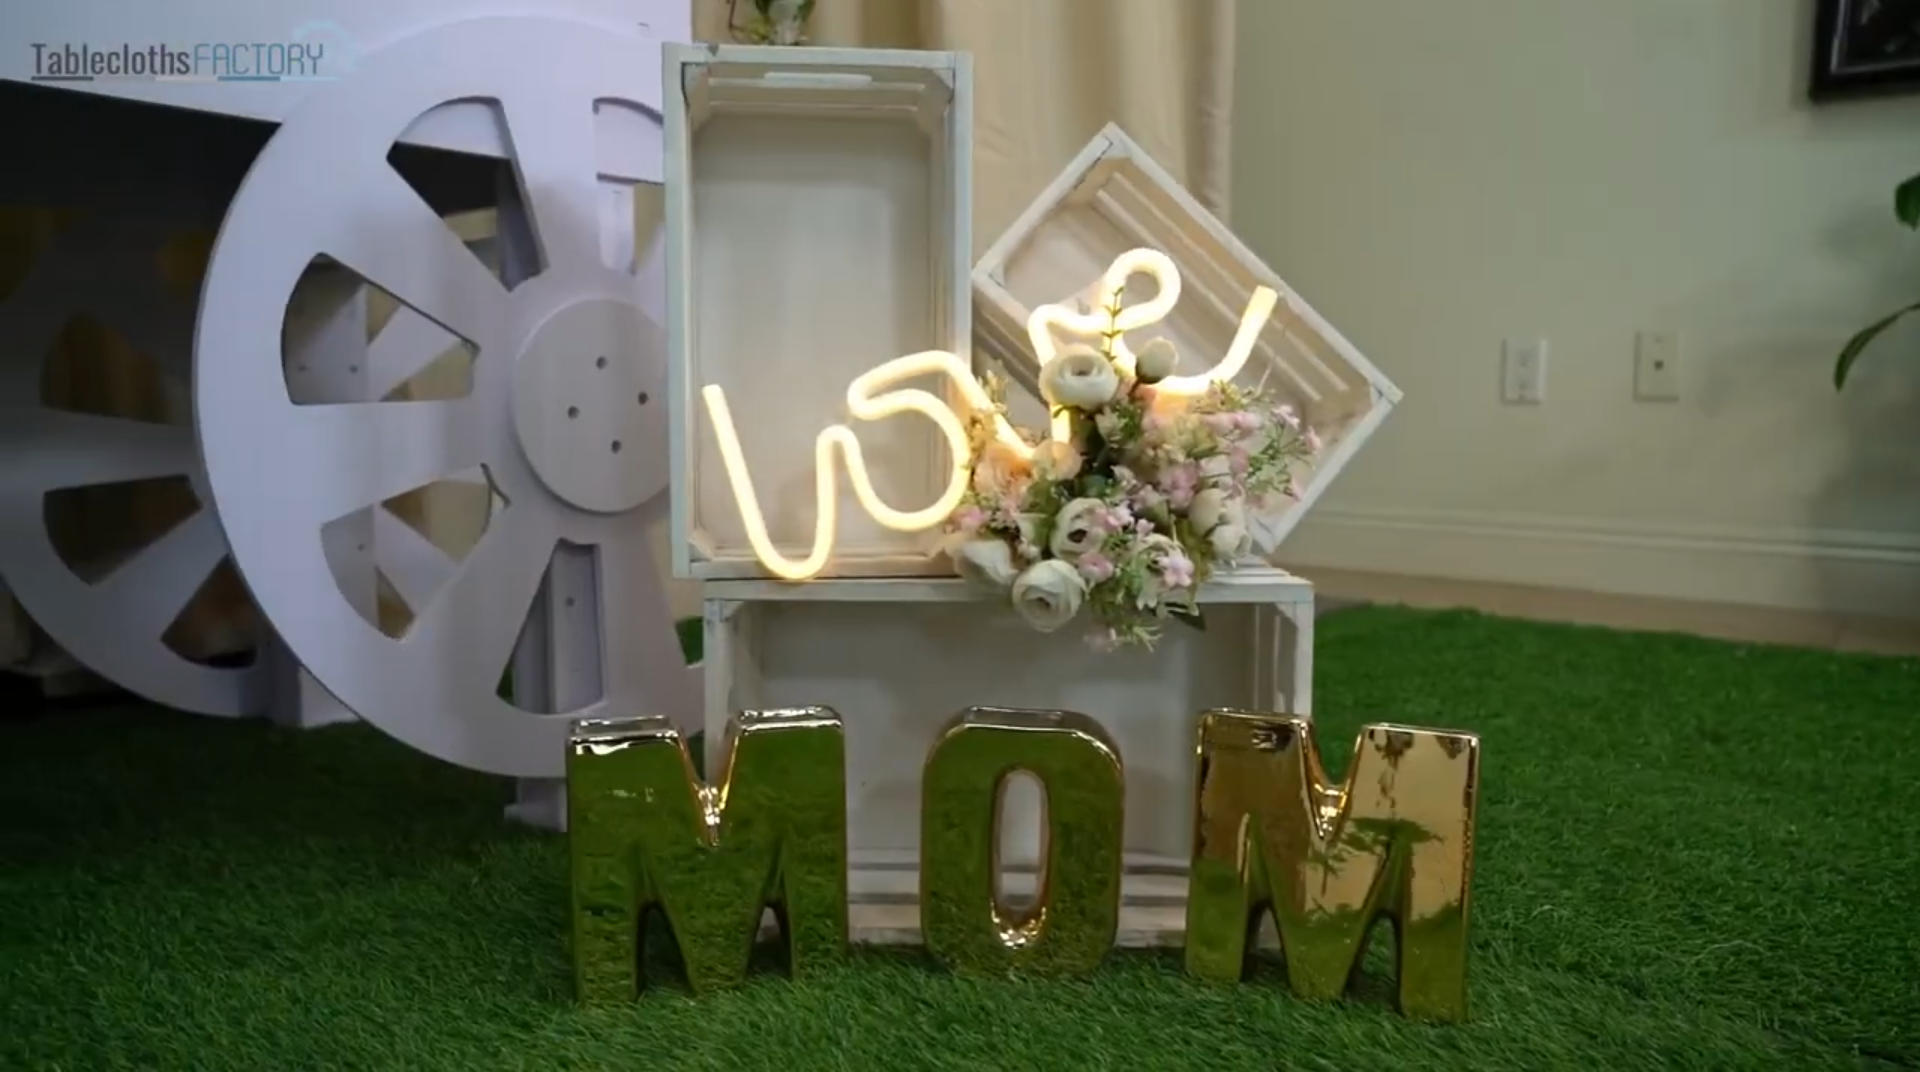 Elegant Mother's Day decor with 'LOVE' neon sign and floral arrangements.